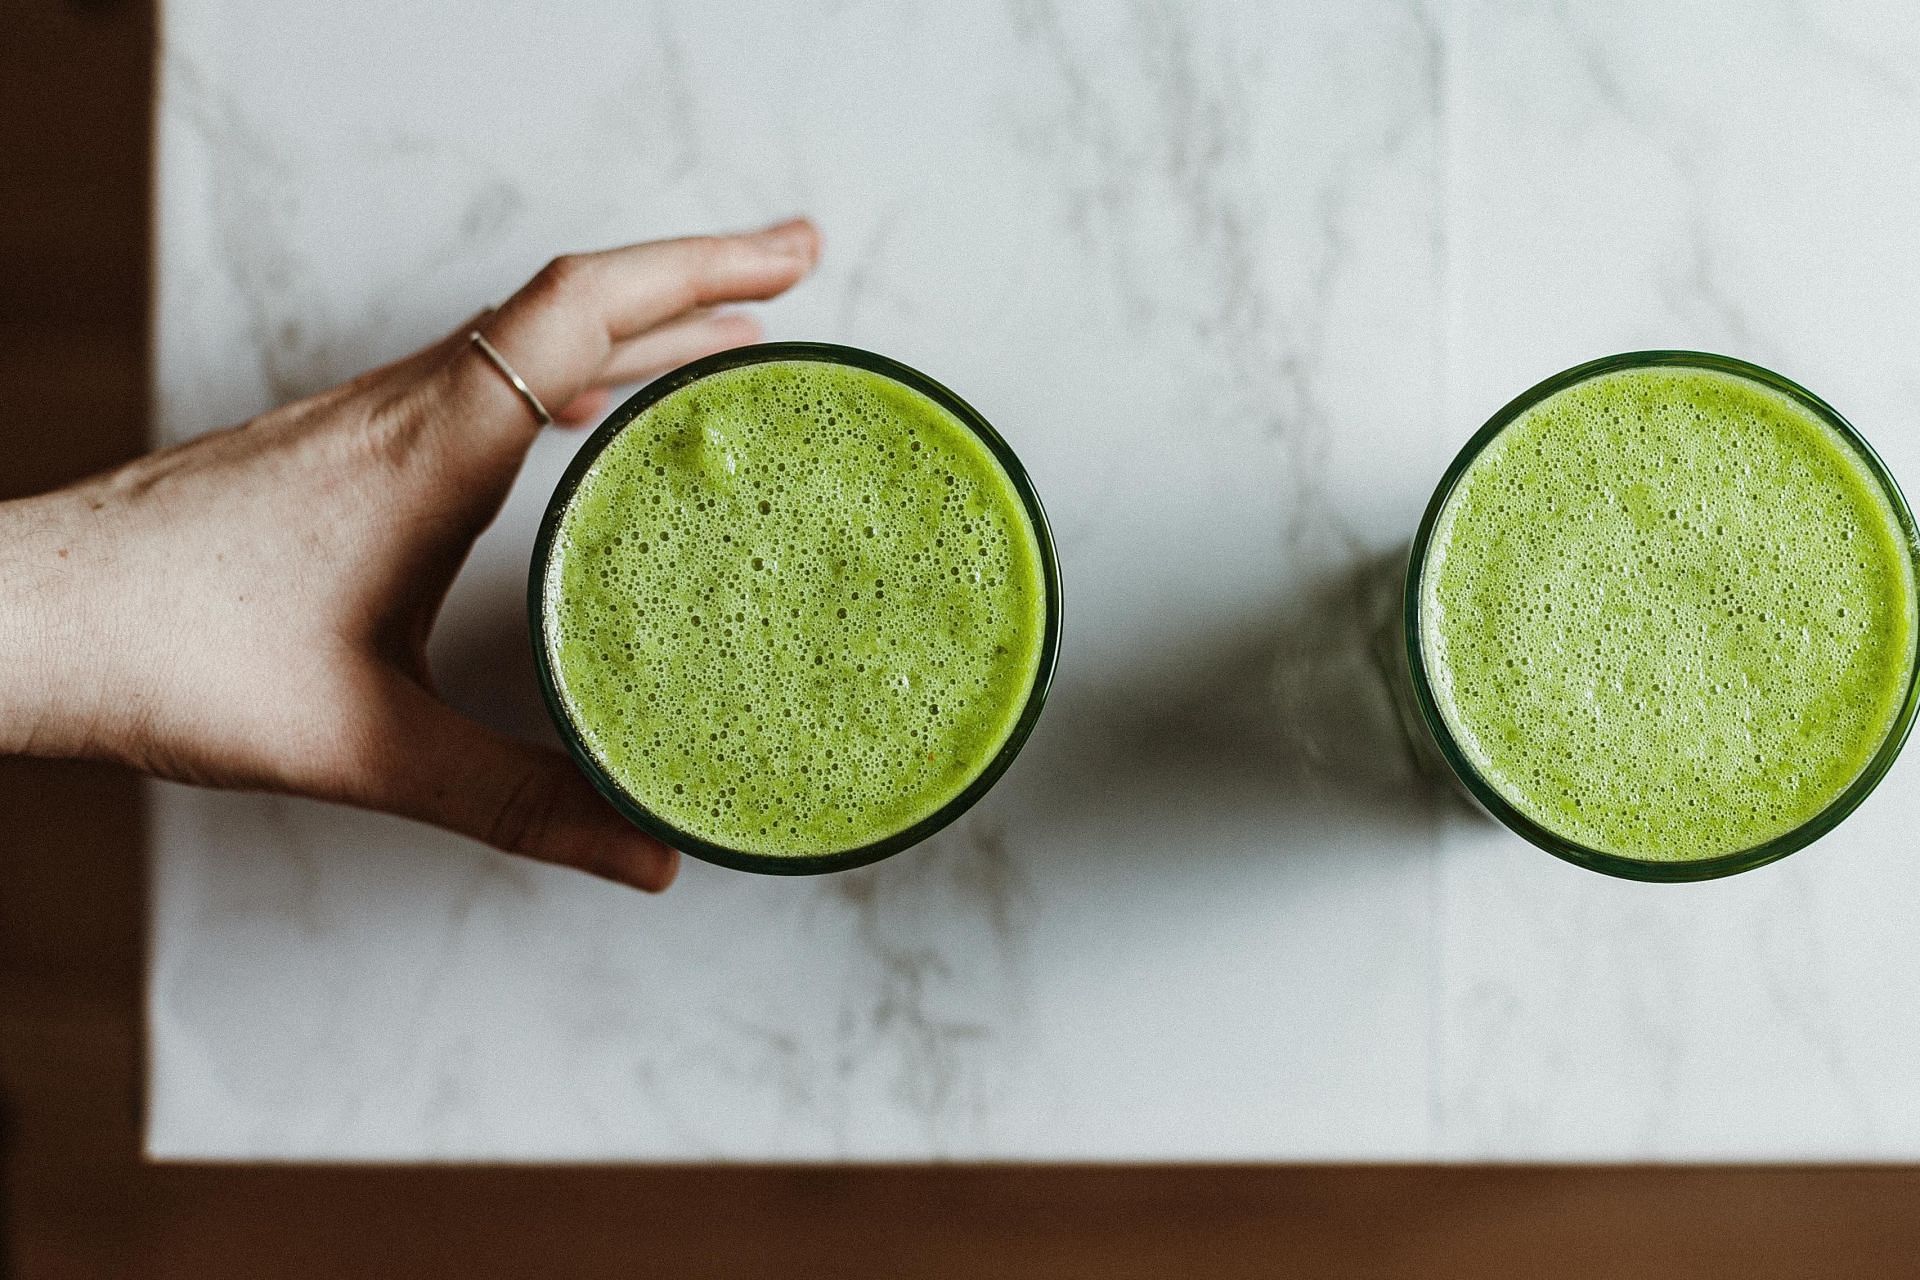 Spinach as a serotonin-boosting food (image sourced via Pexels / Photo by Alex)